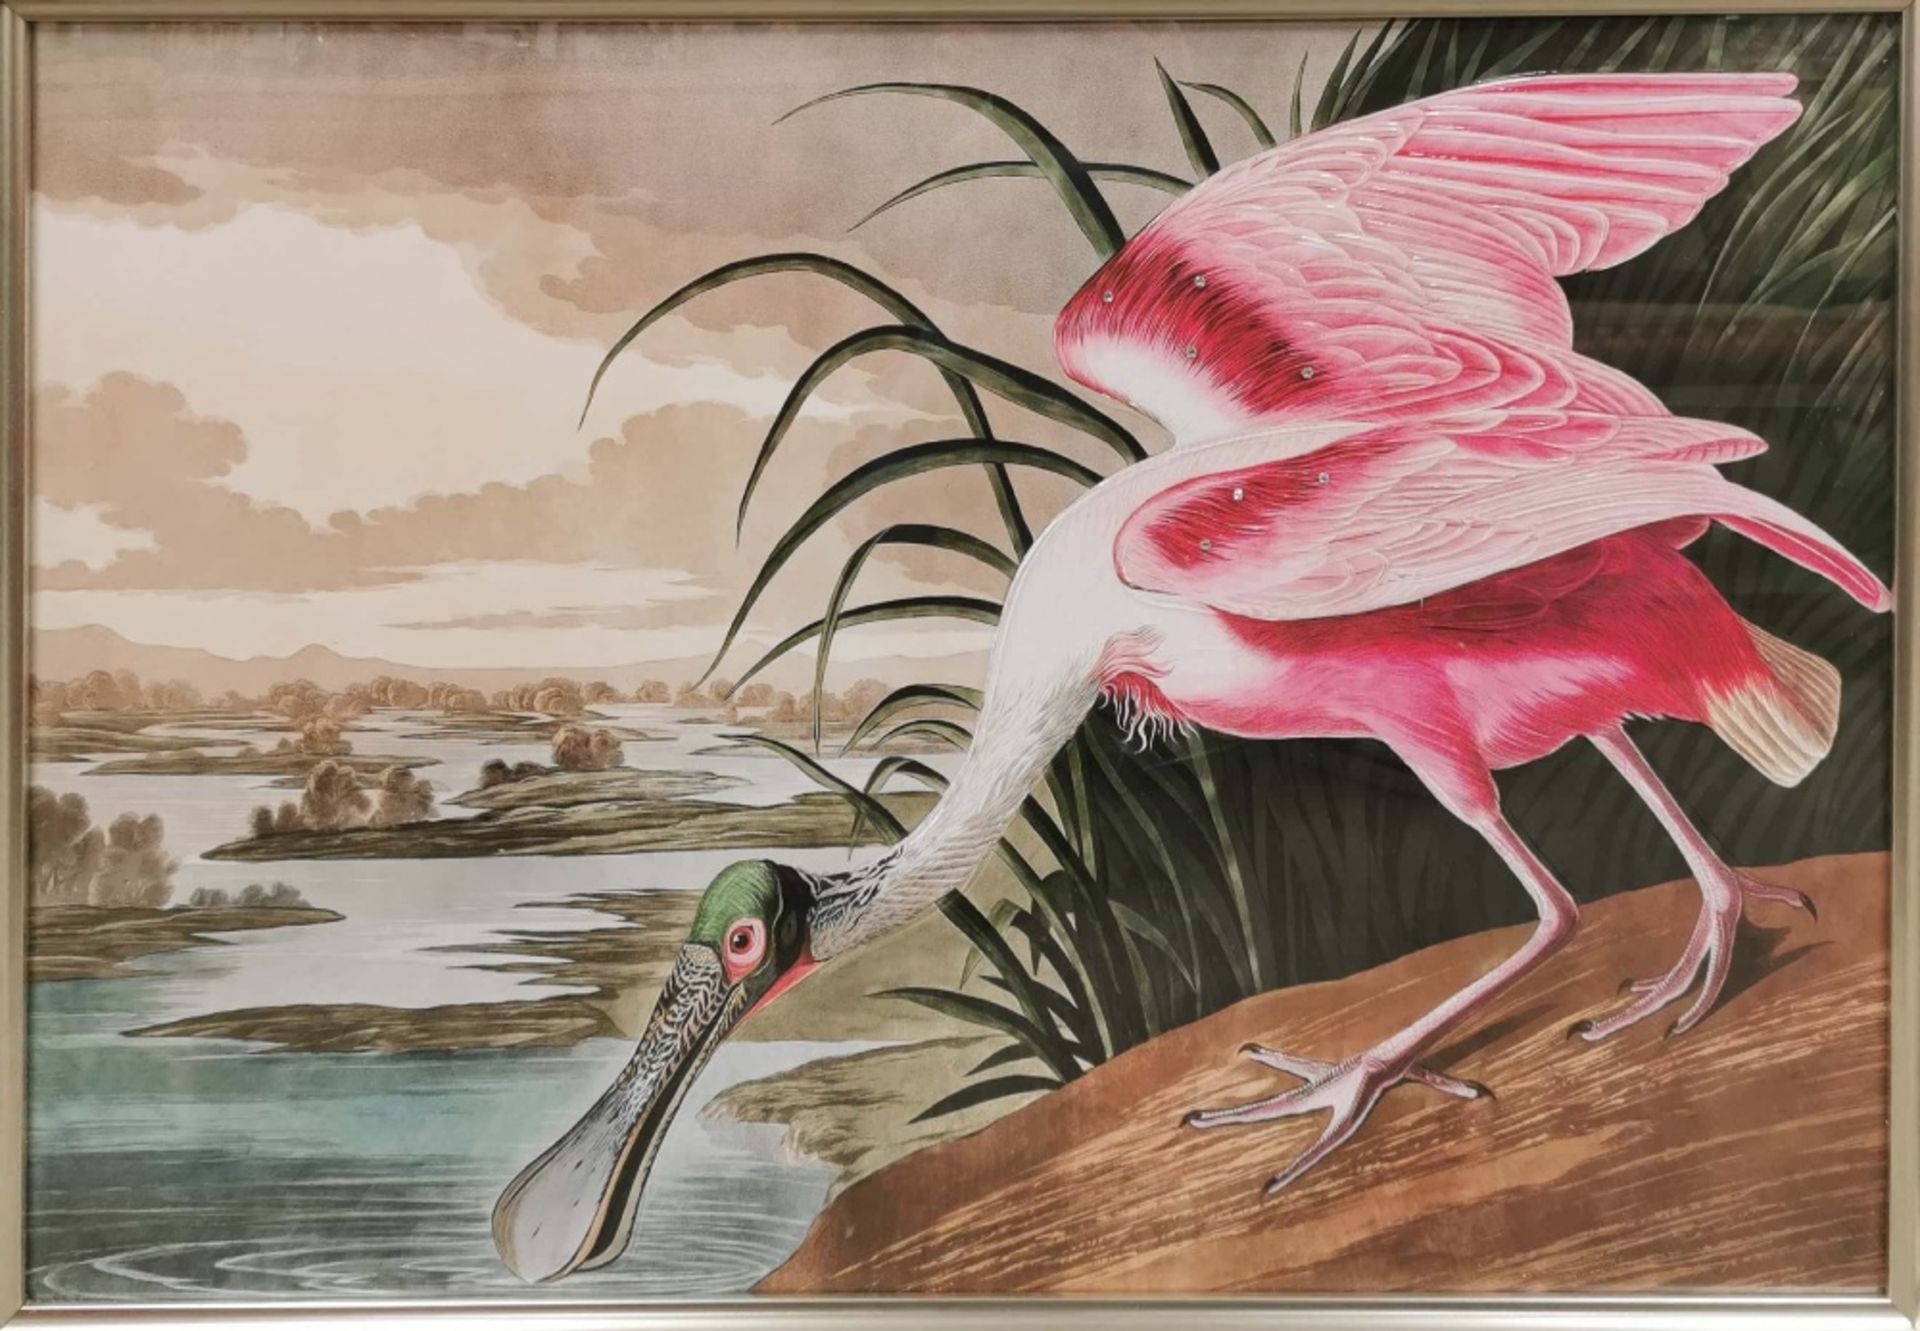 A reproduction framed print of 'Roseate Spoonbill' after John James Audubon (American, 1785-1851), - Image 2 of 3